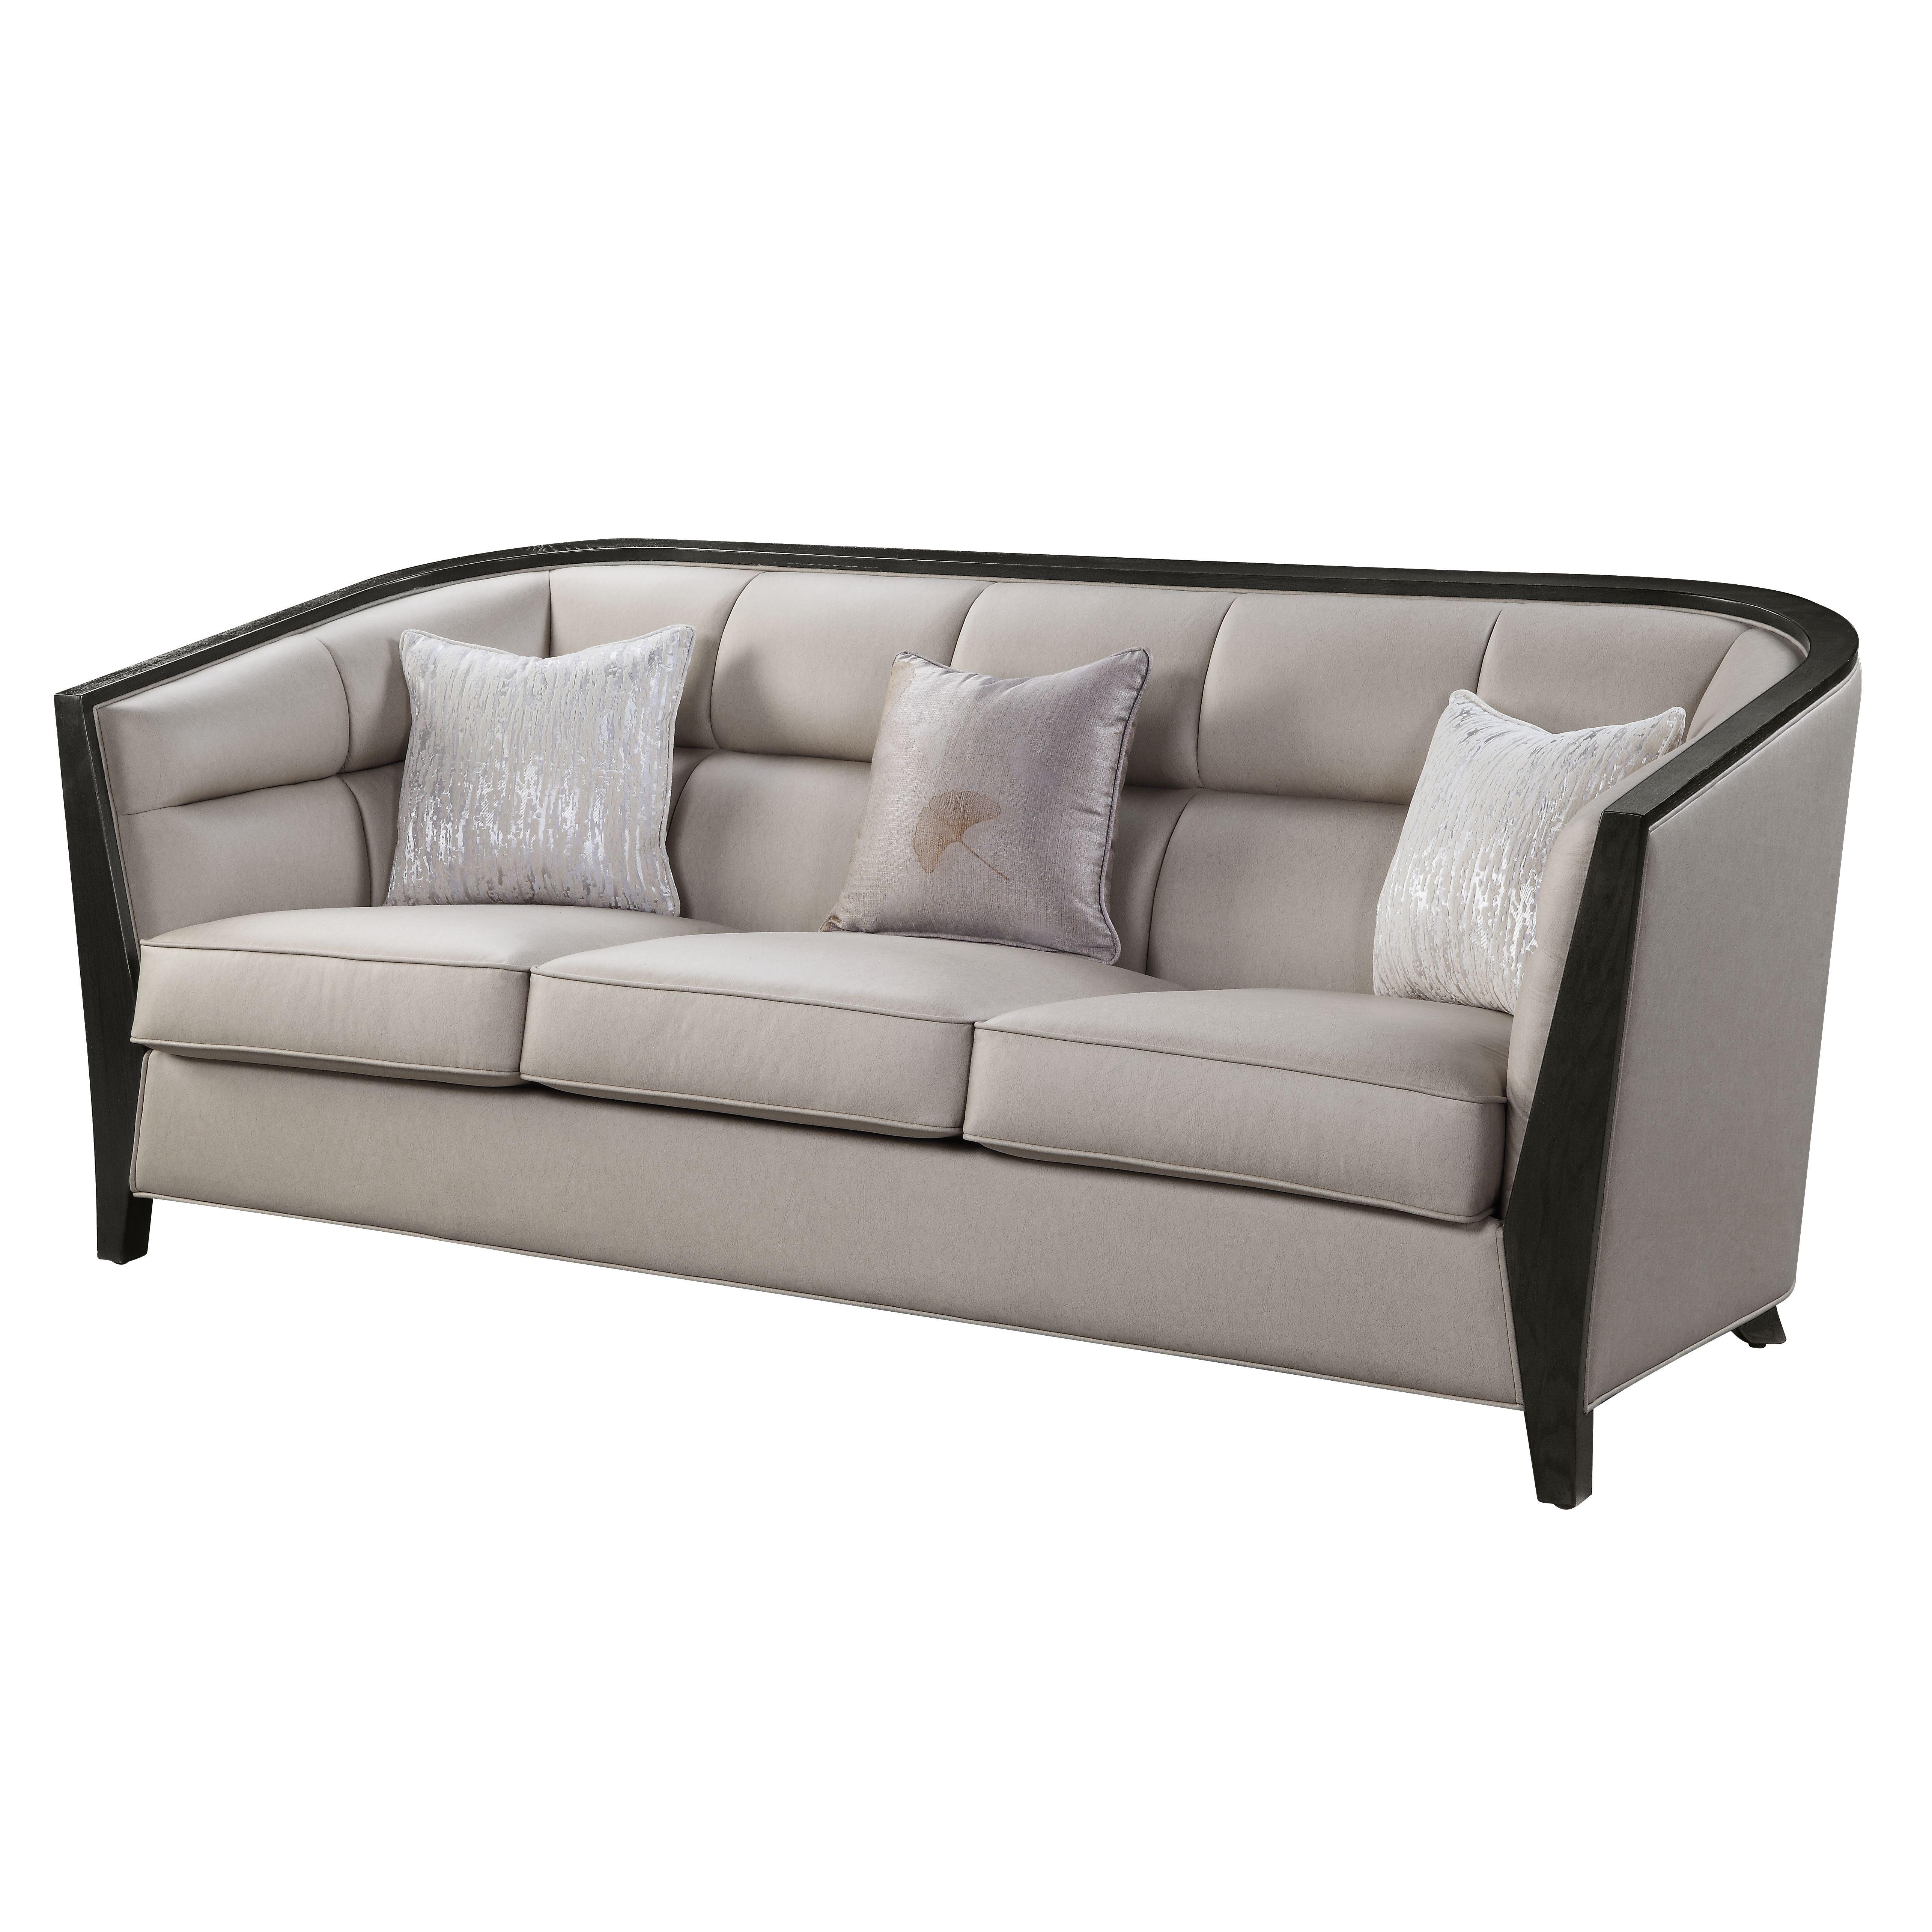 Contemporary, Classic Sofa Zemocryss 54235 in Beige Fabric